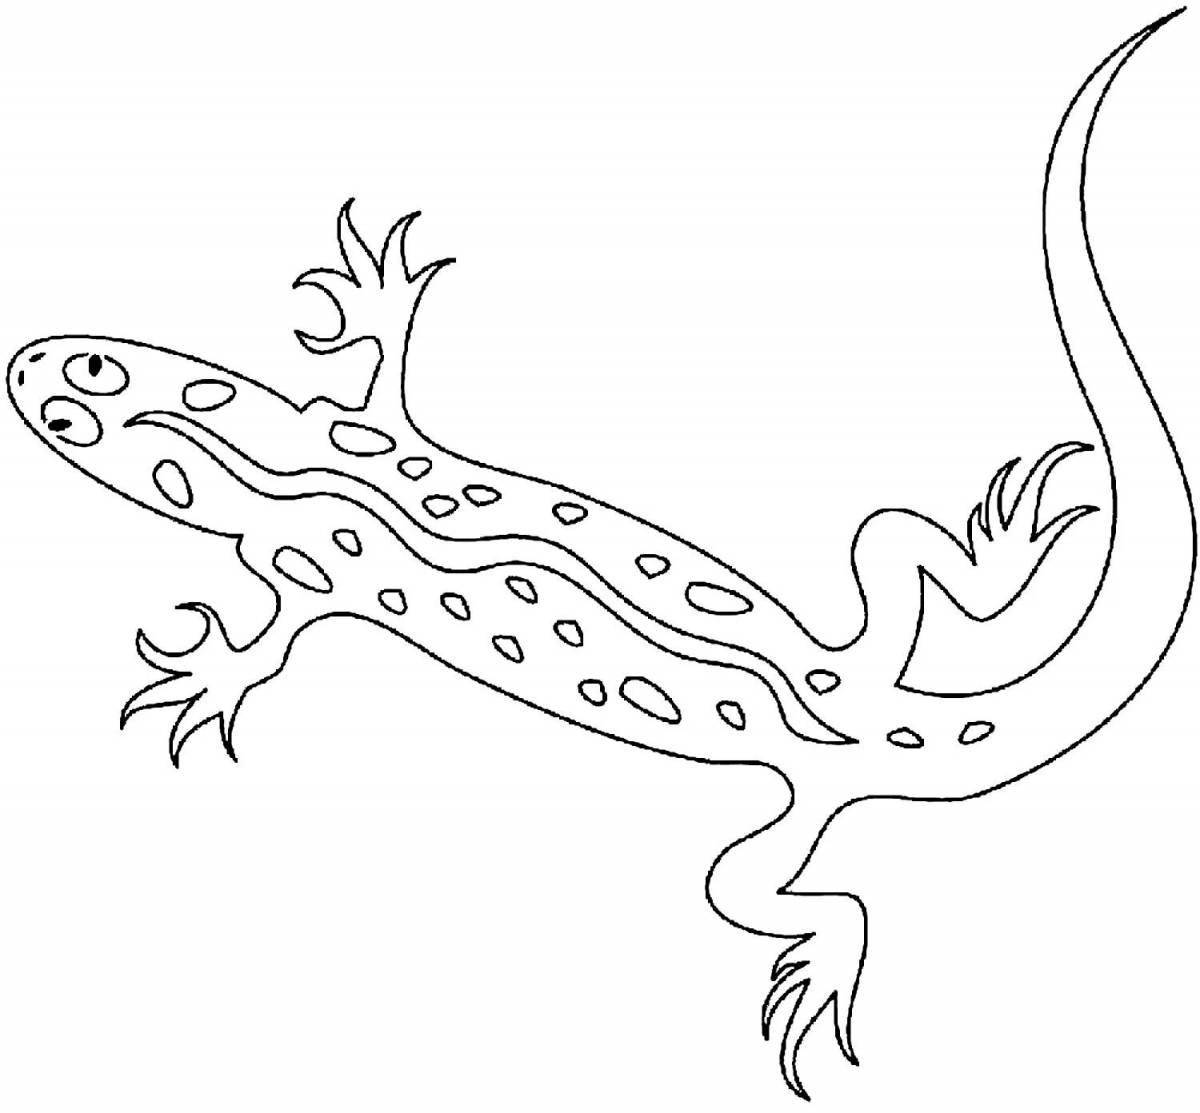 Playful common newt coloring page